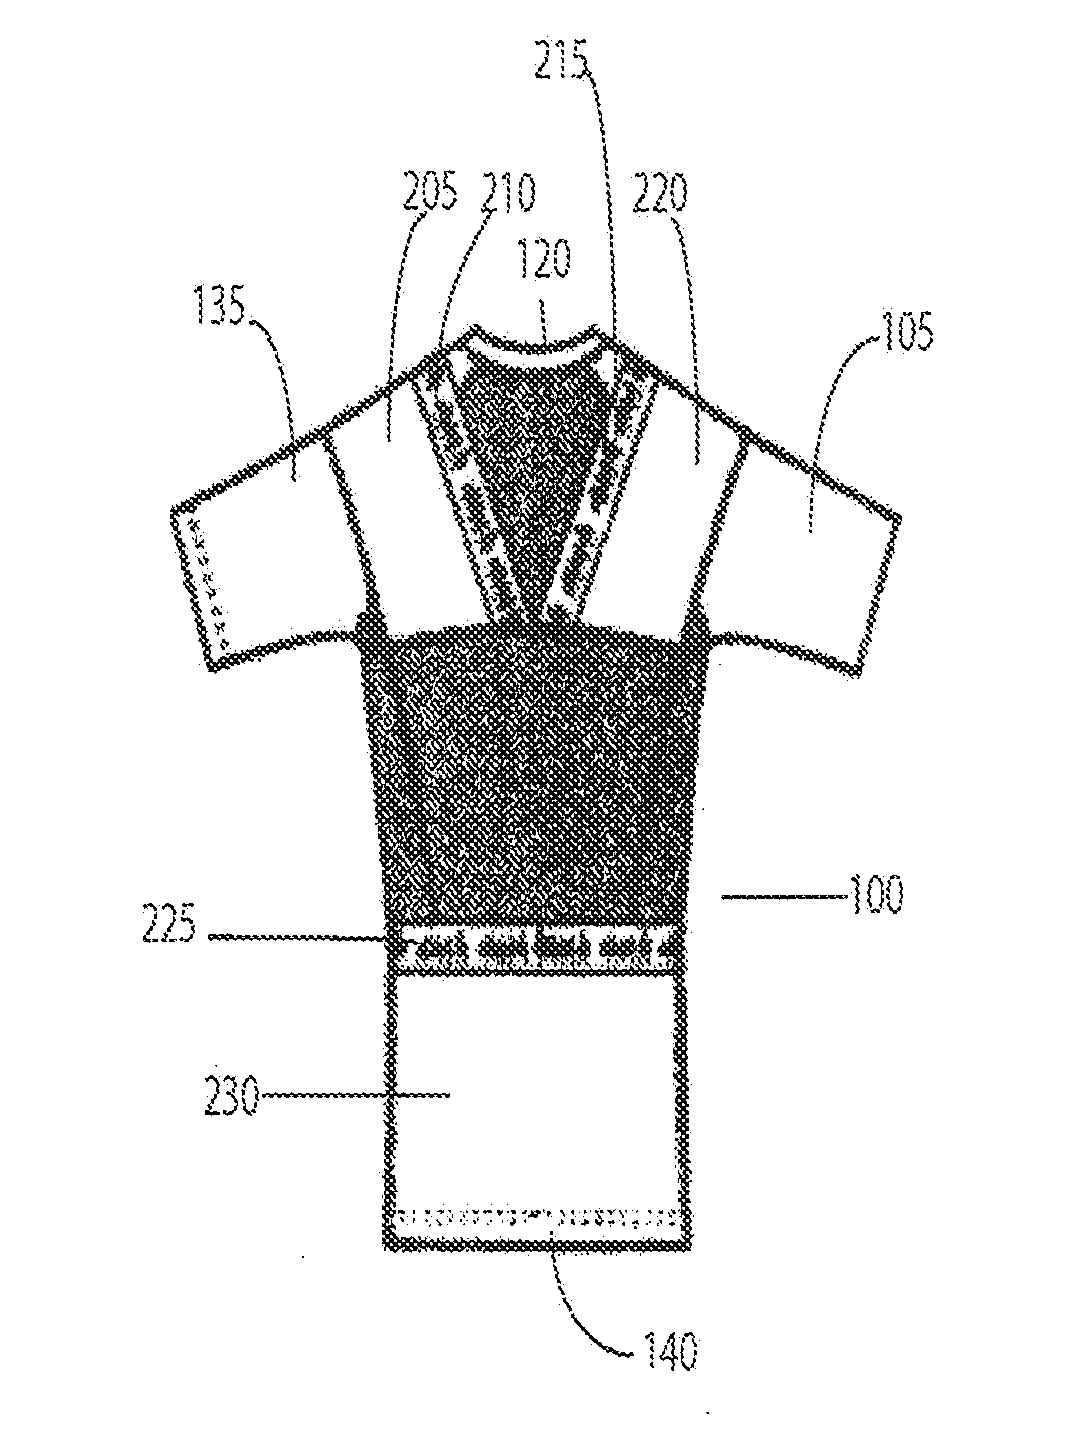 Compression garments providing targeted and simultaneous compressive thermal therapy